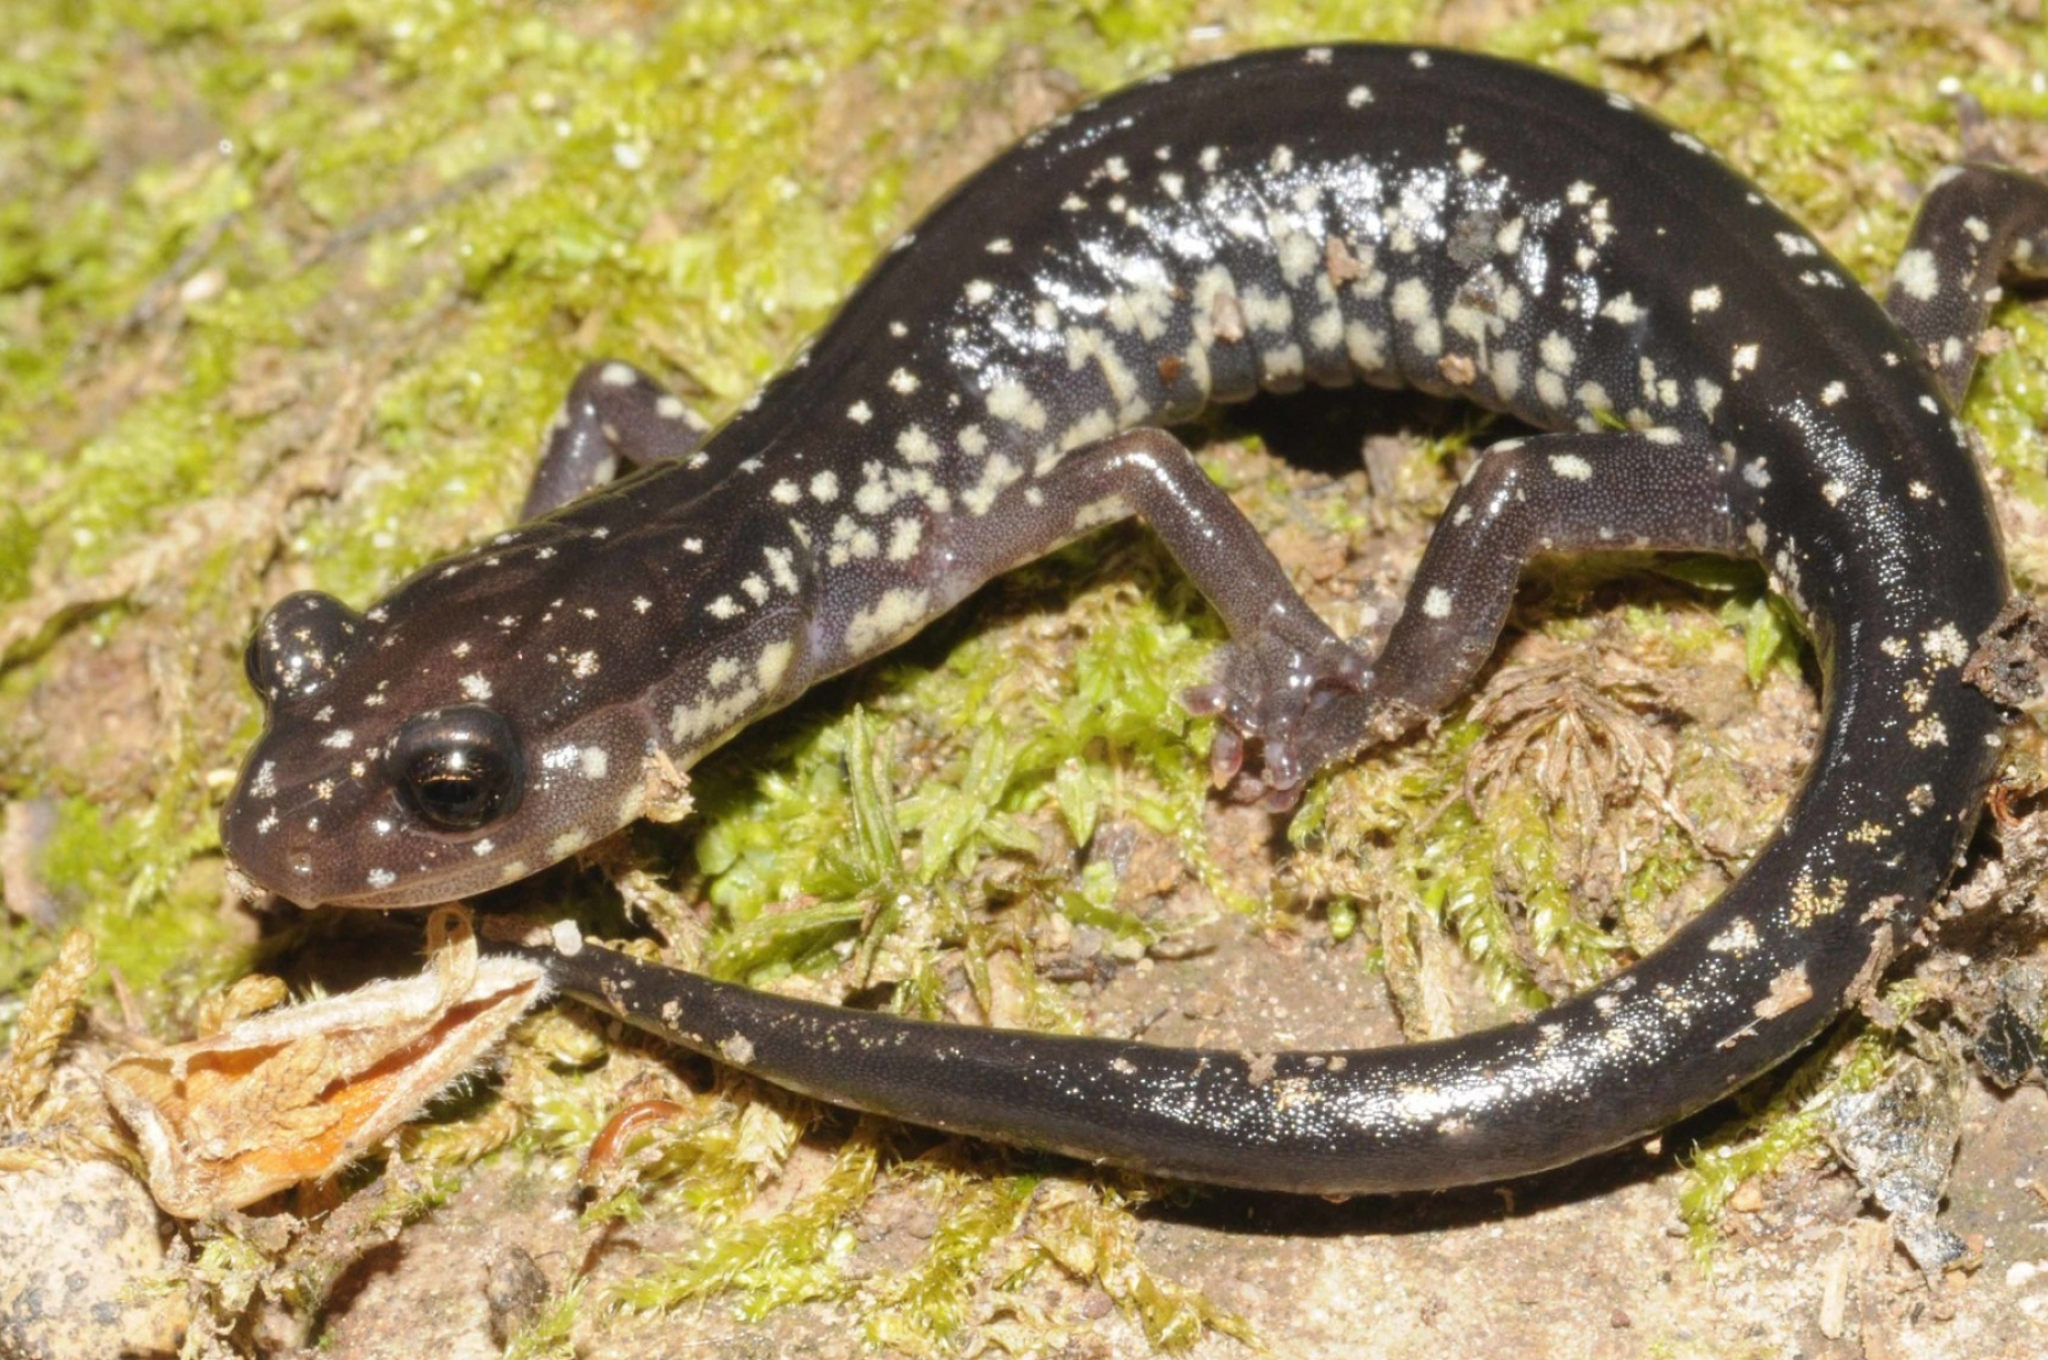 Cow knob salamander photos, Close encounters with wildlife, Inaturalist's wildlife collection, Nature at its best, 2050x1360 HD Desktop